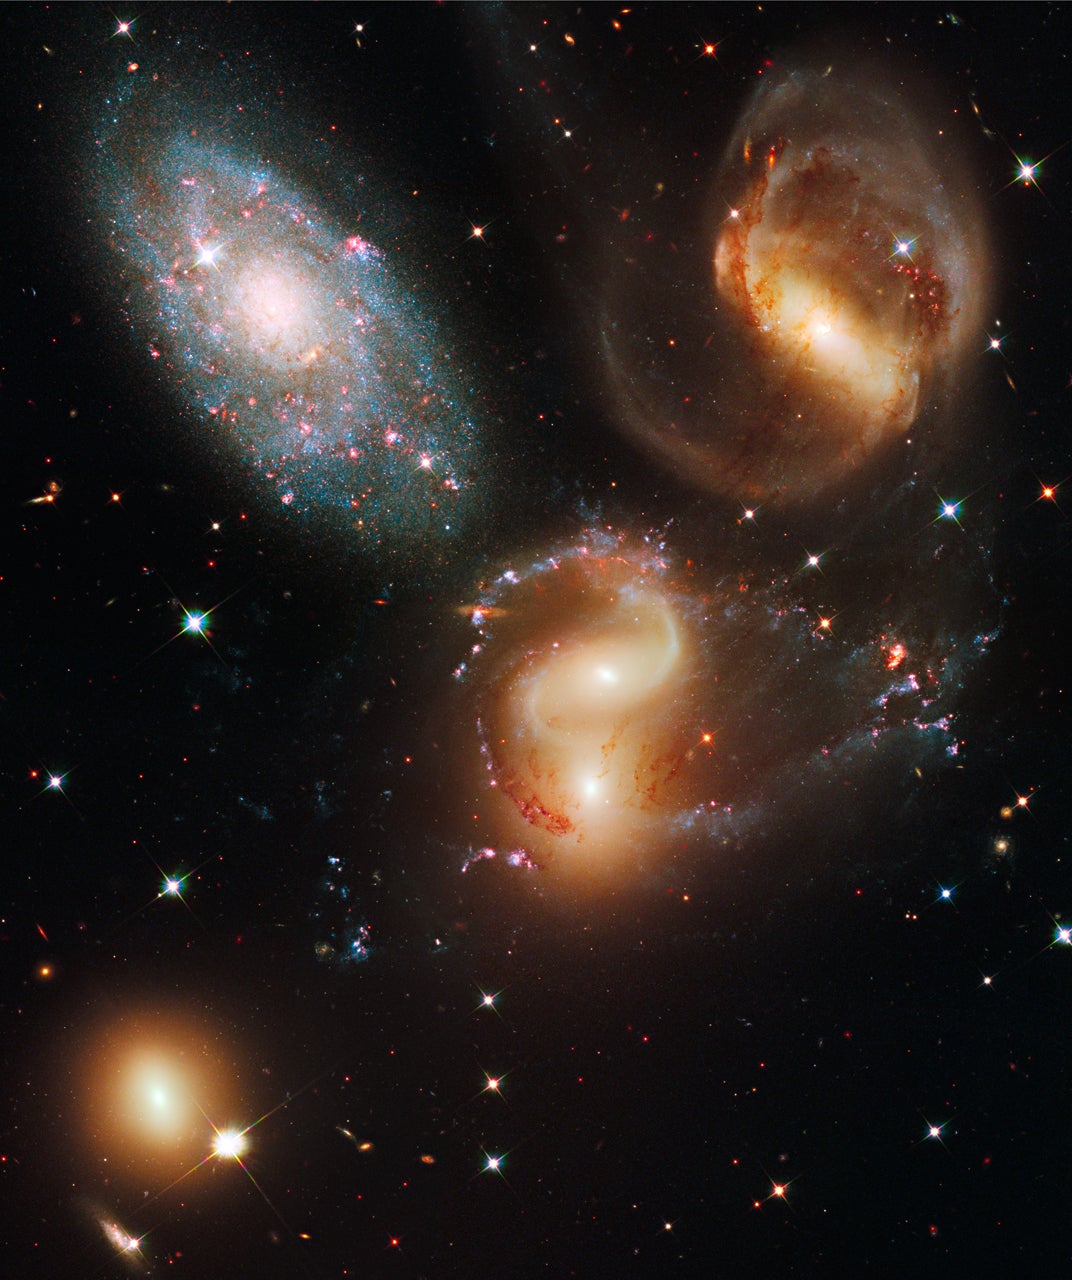 Stephen’s Quintet, a compact group of five galaxies 290 million light years from Earth in the constellation Pegasus